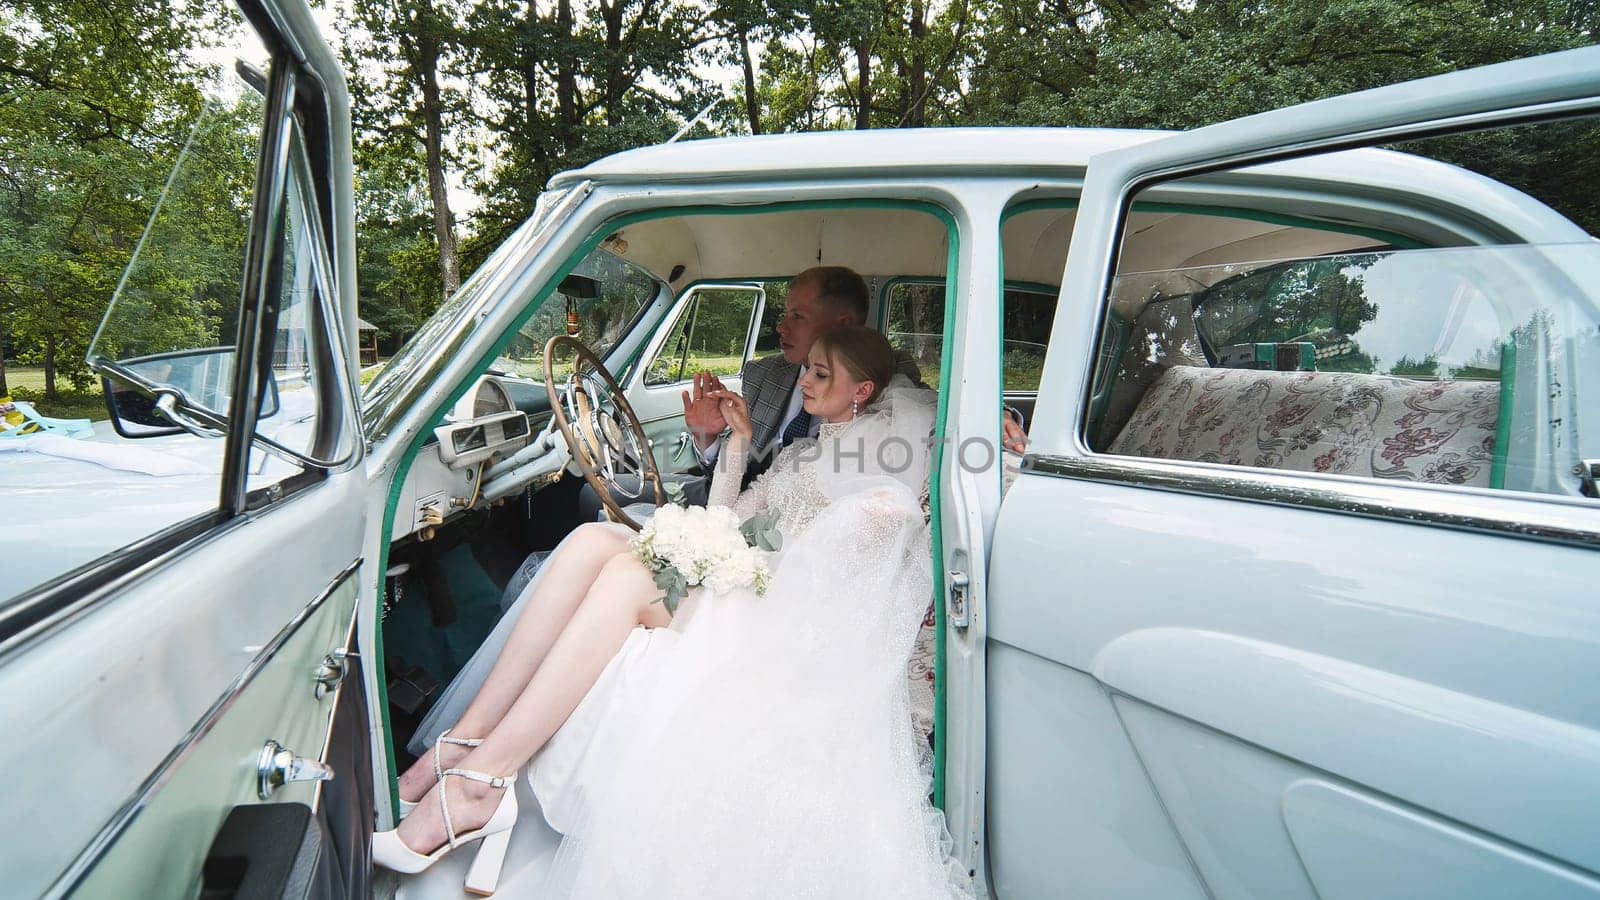 Bride and groom enjoying each other in a retro car. by DovidPro